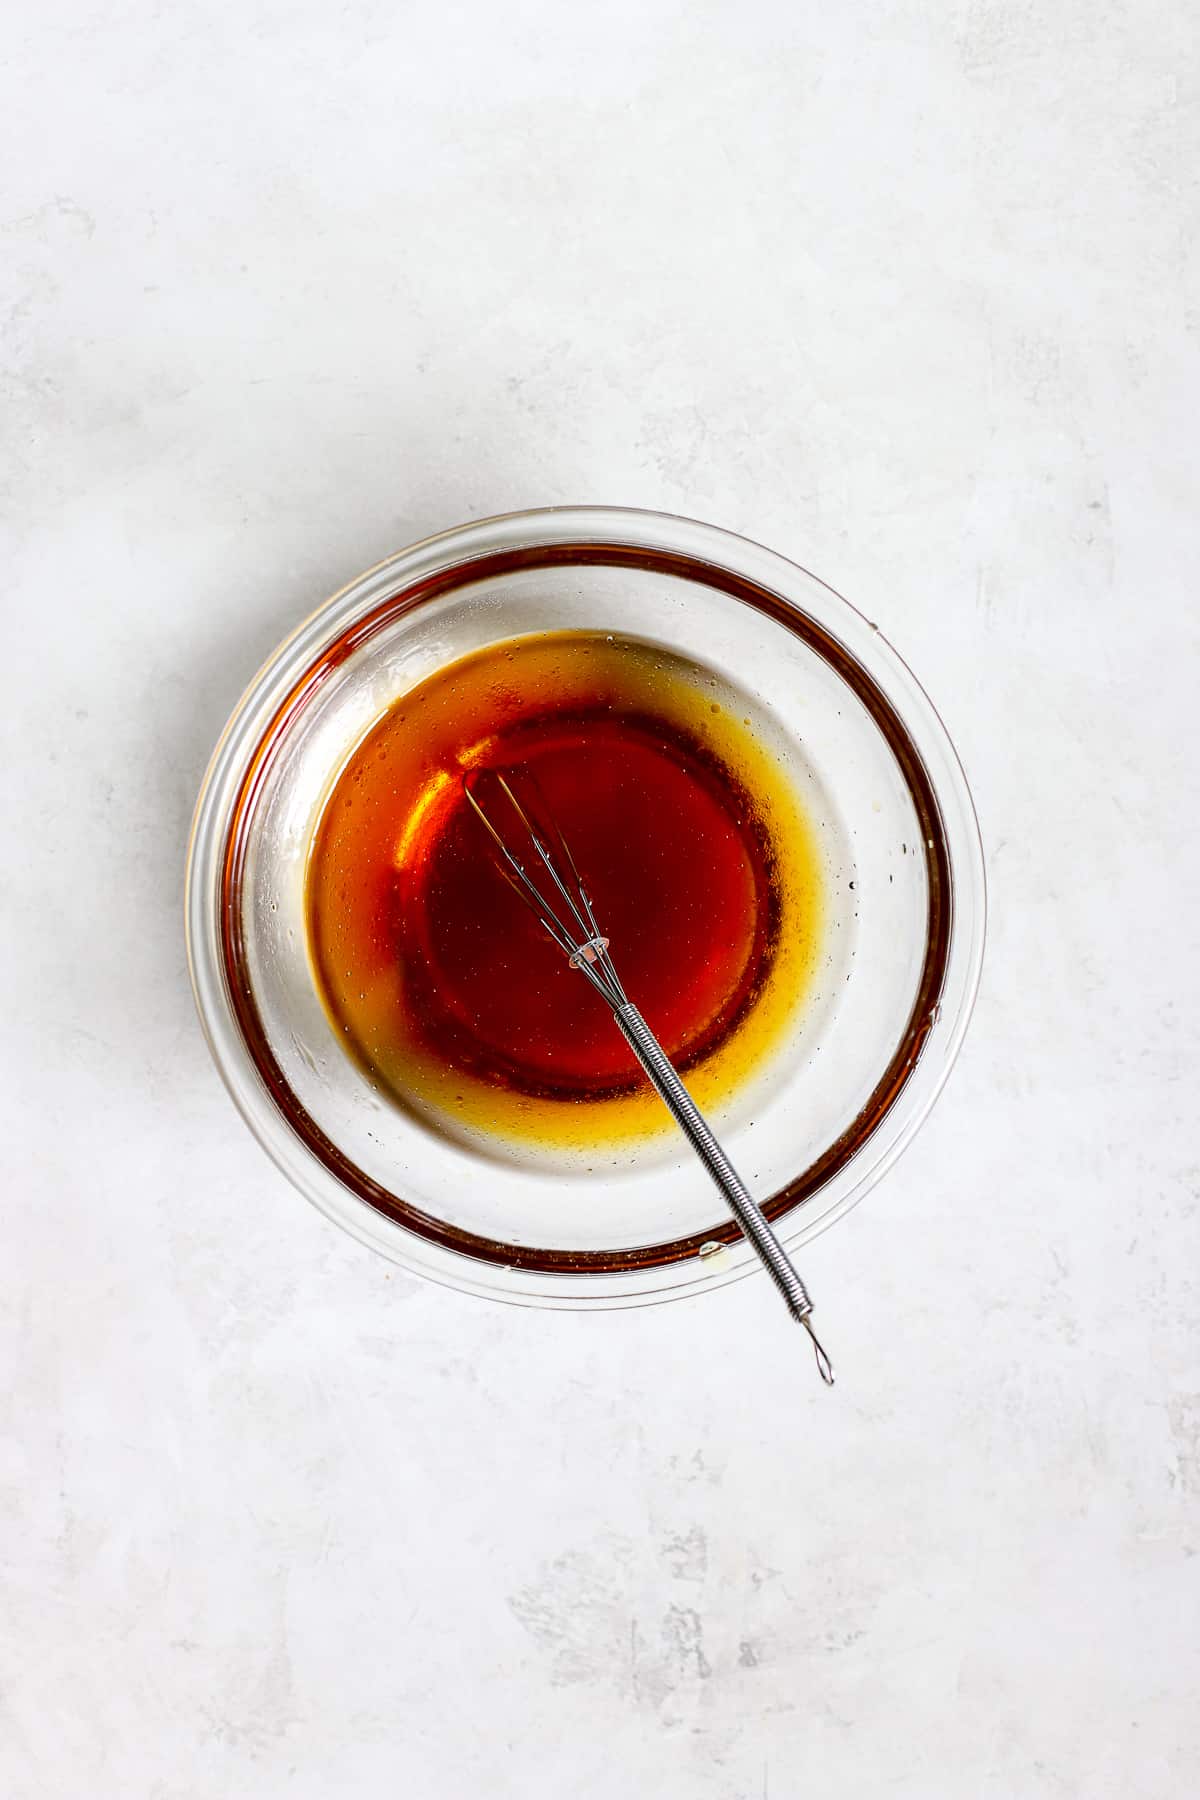 Maple syrup, coconut oil, and vanilla whisked together in small glass bowl on gray/white surface